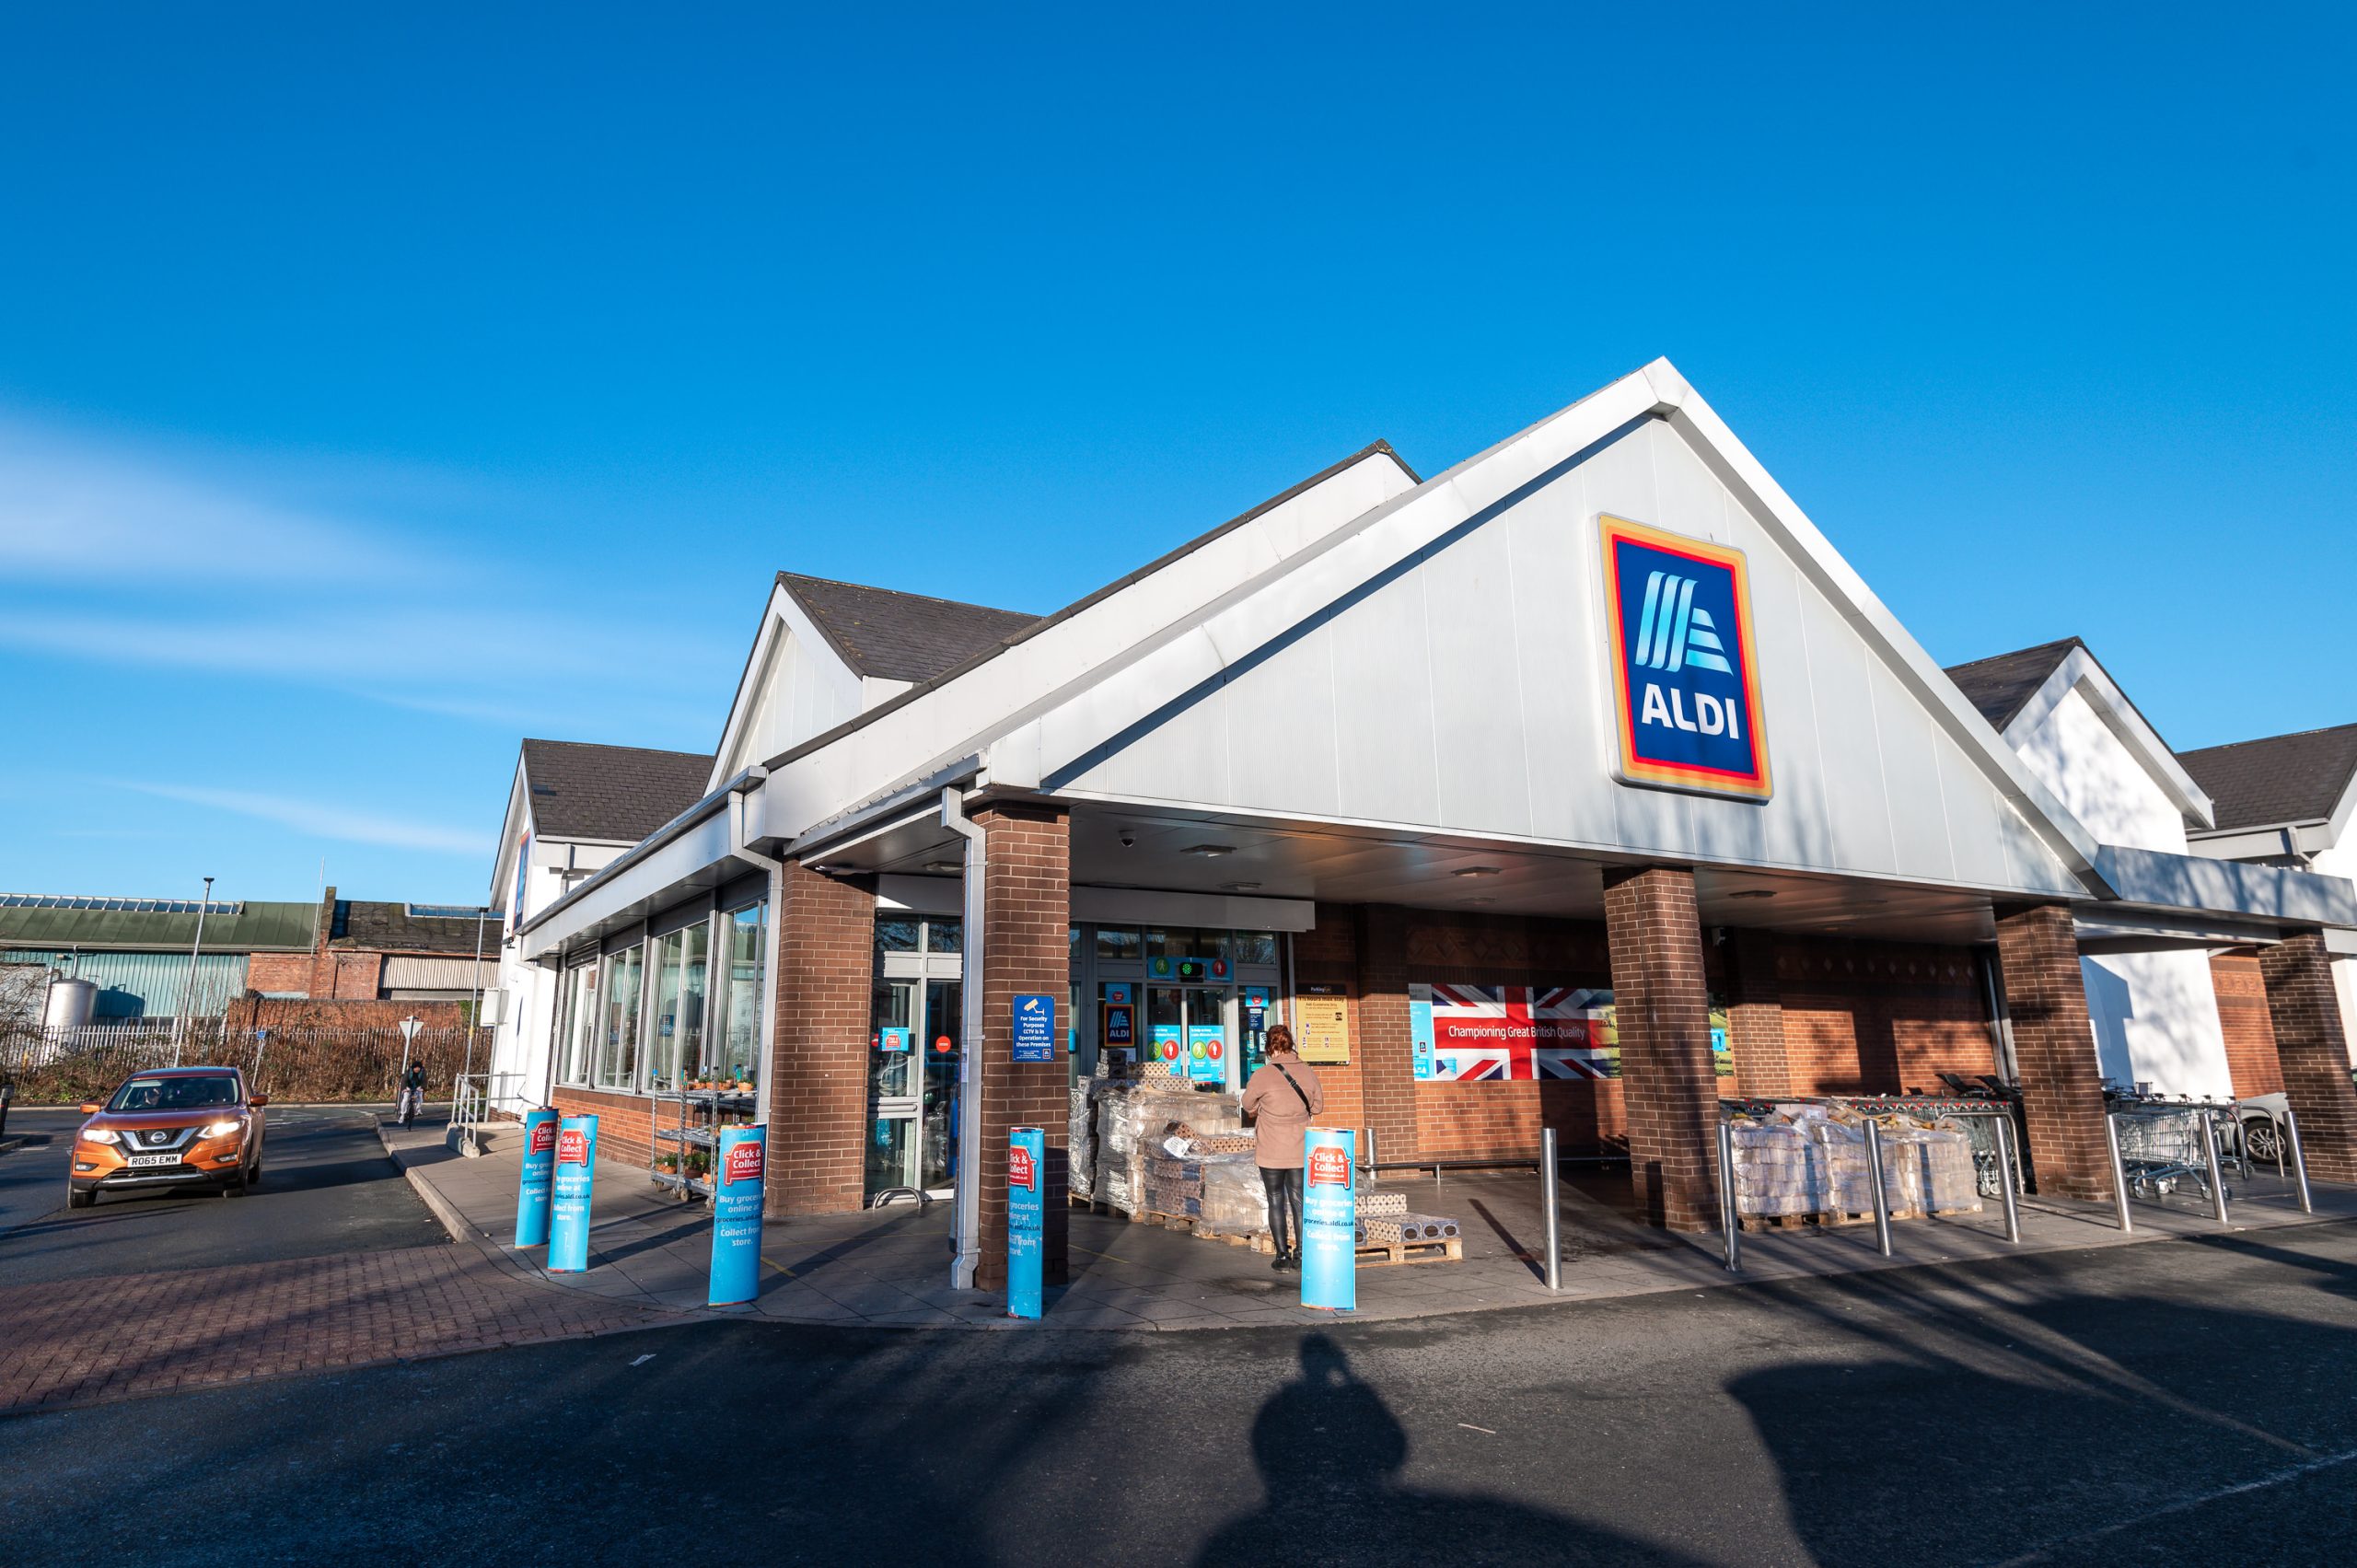 NEWS | Herefordshire based business given huge opportunity to work with discounter supermarket Aldi